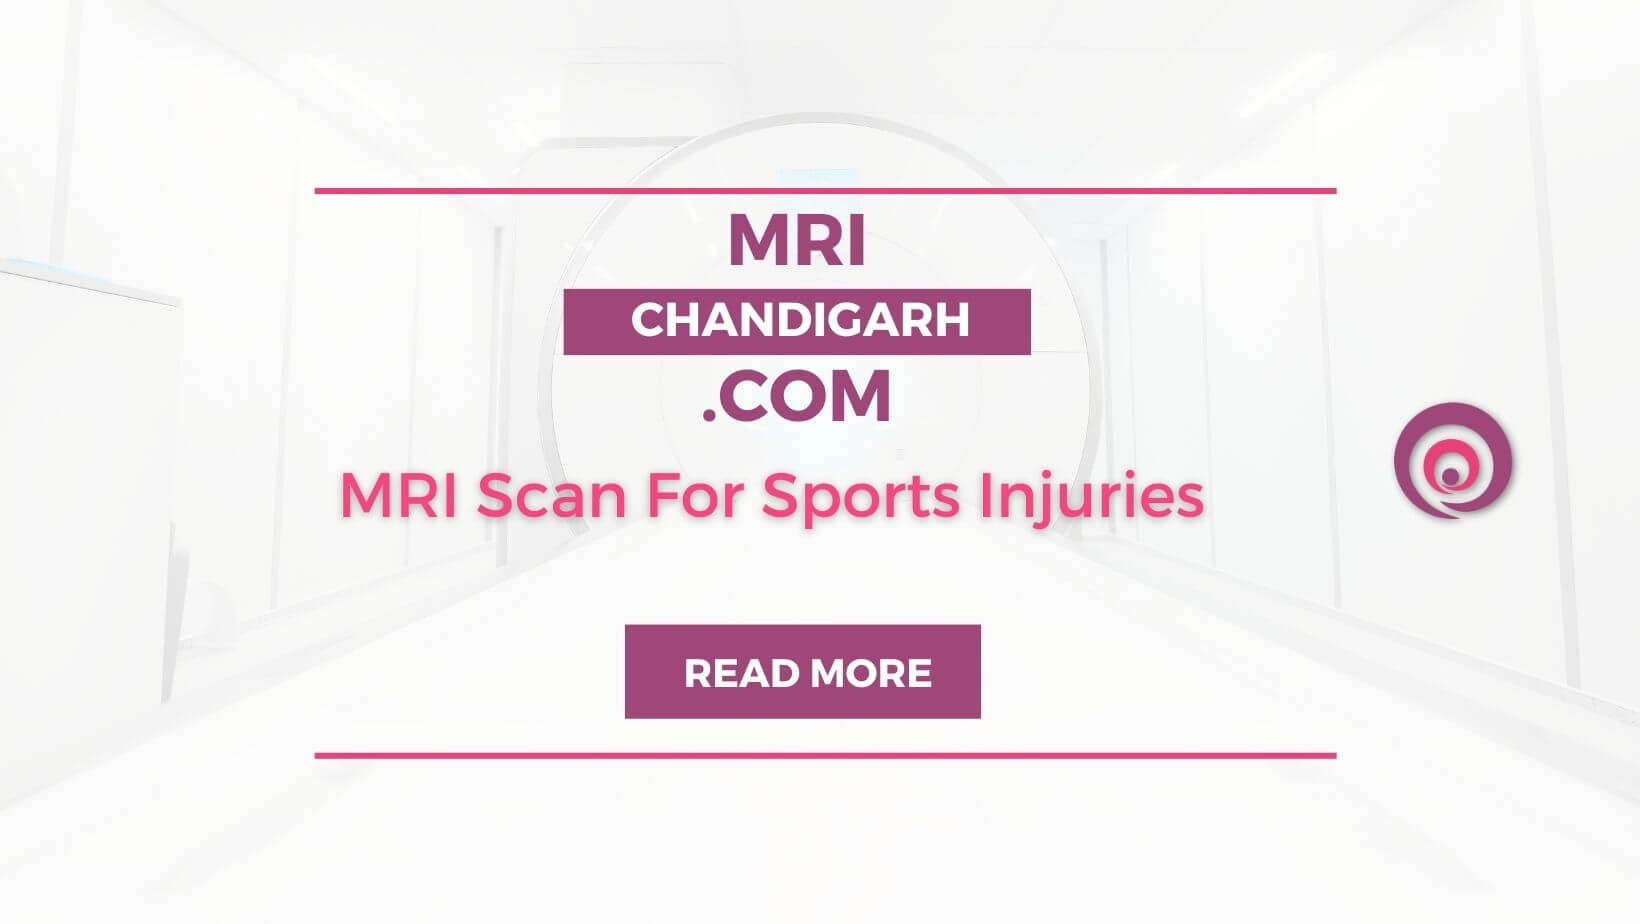 MRI Scan For Sports Injuries